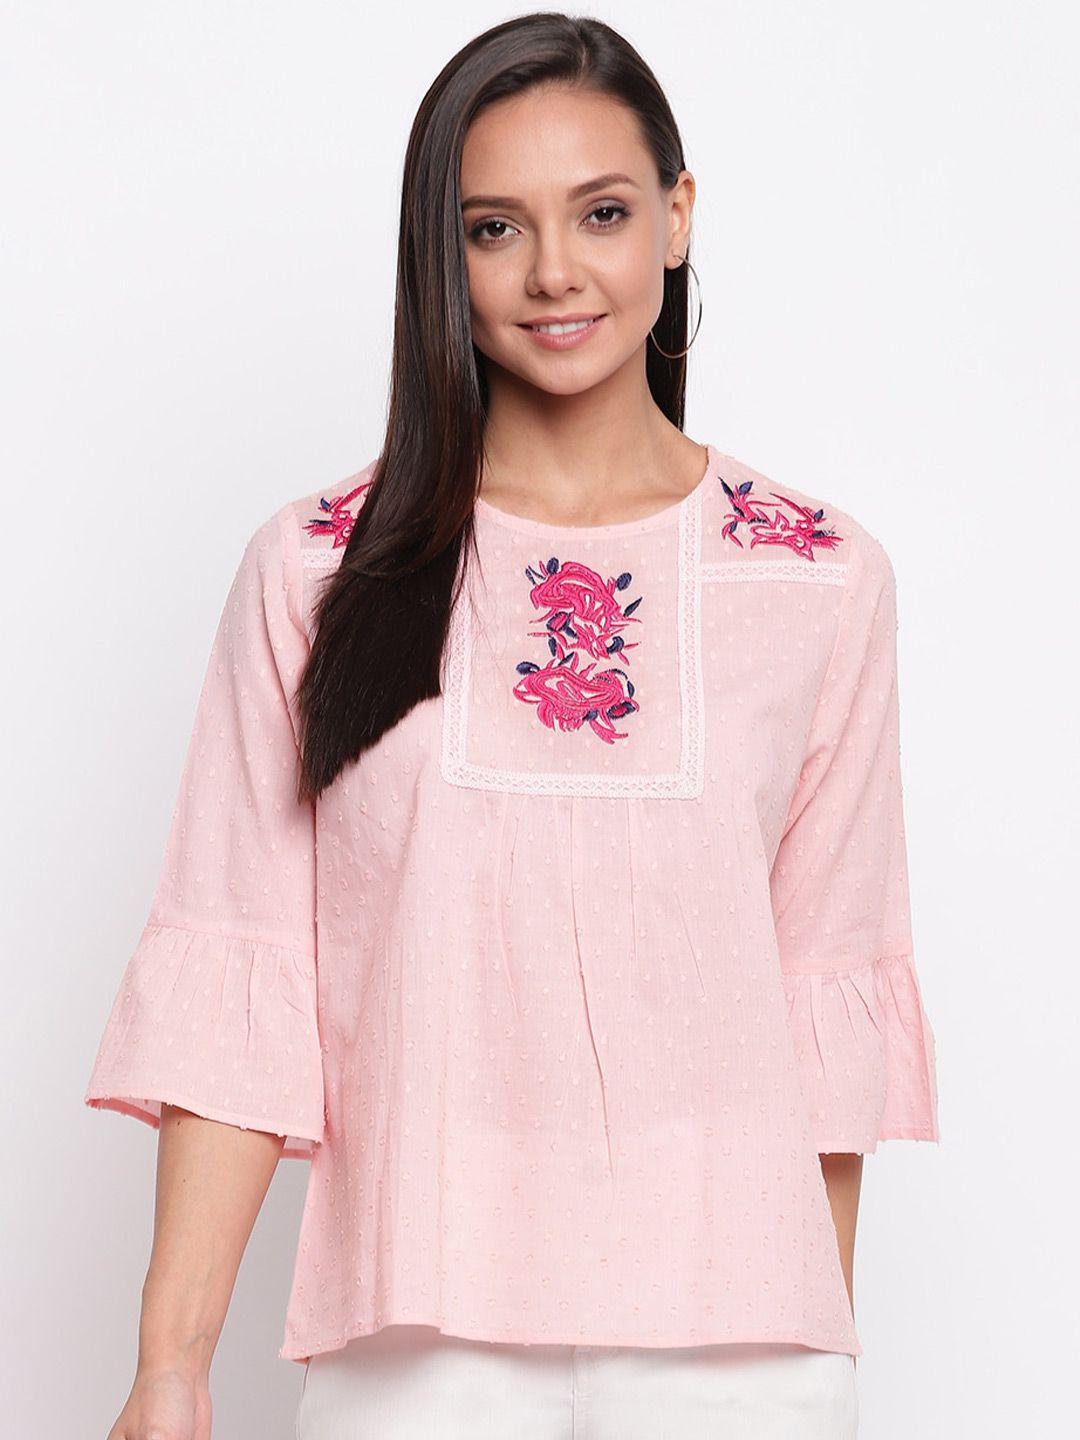 mayra floral embroidered top